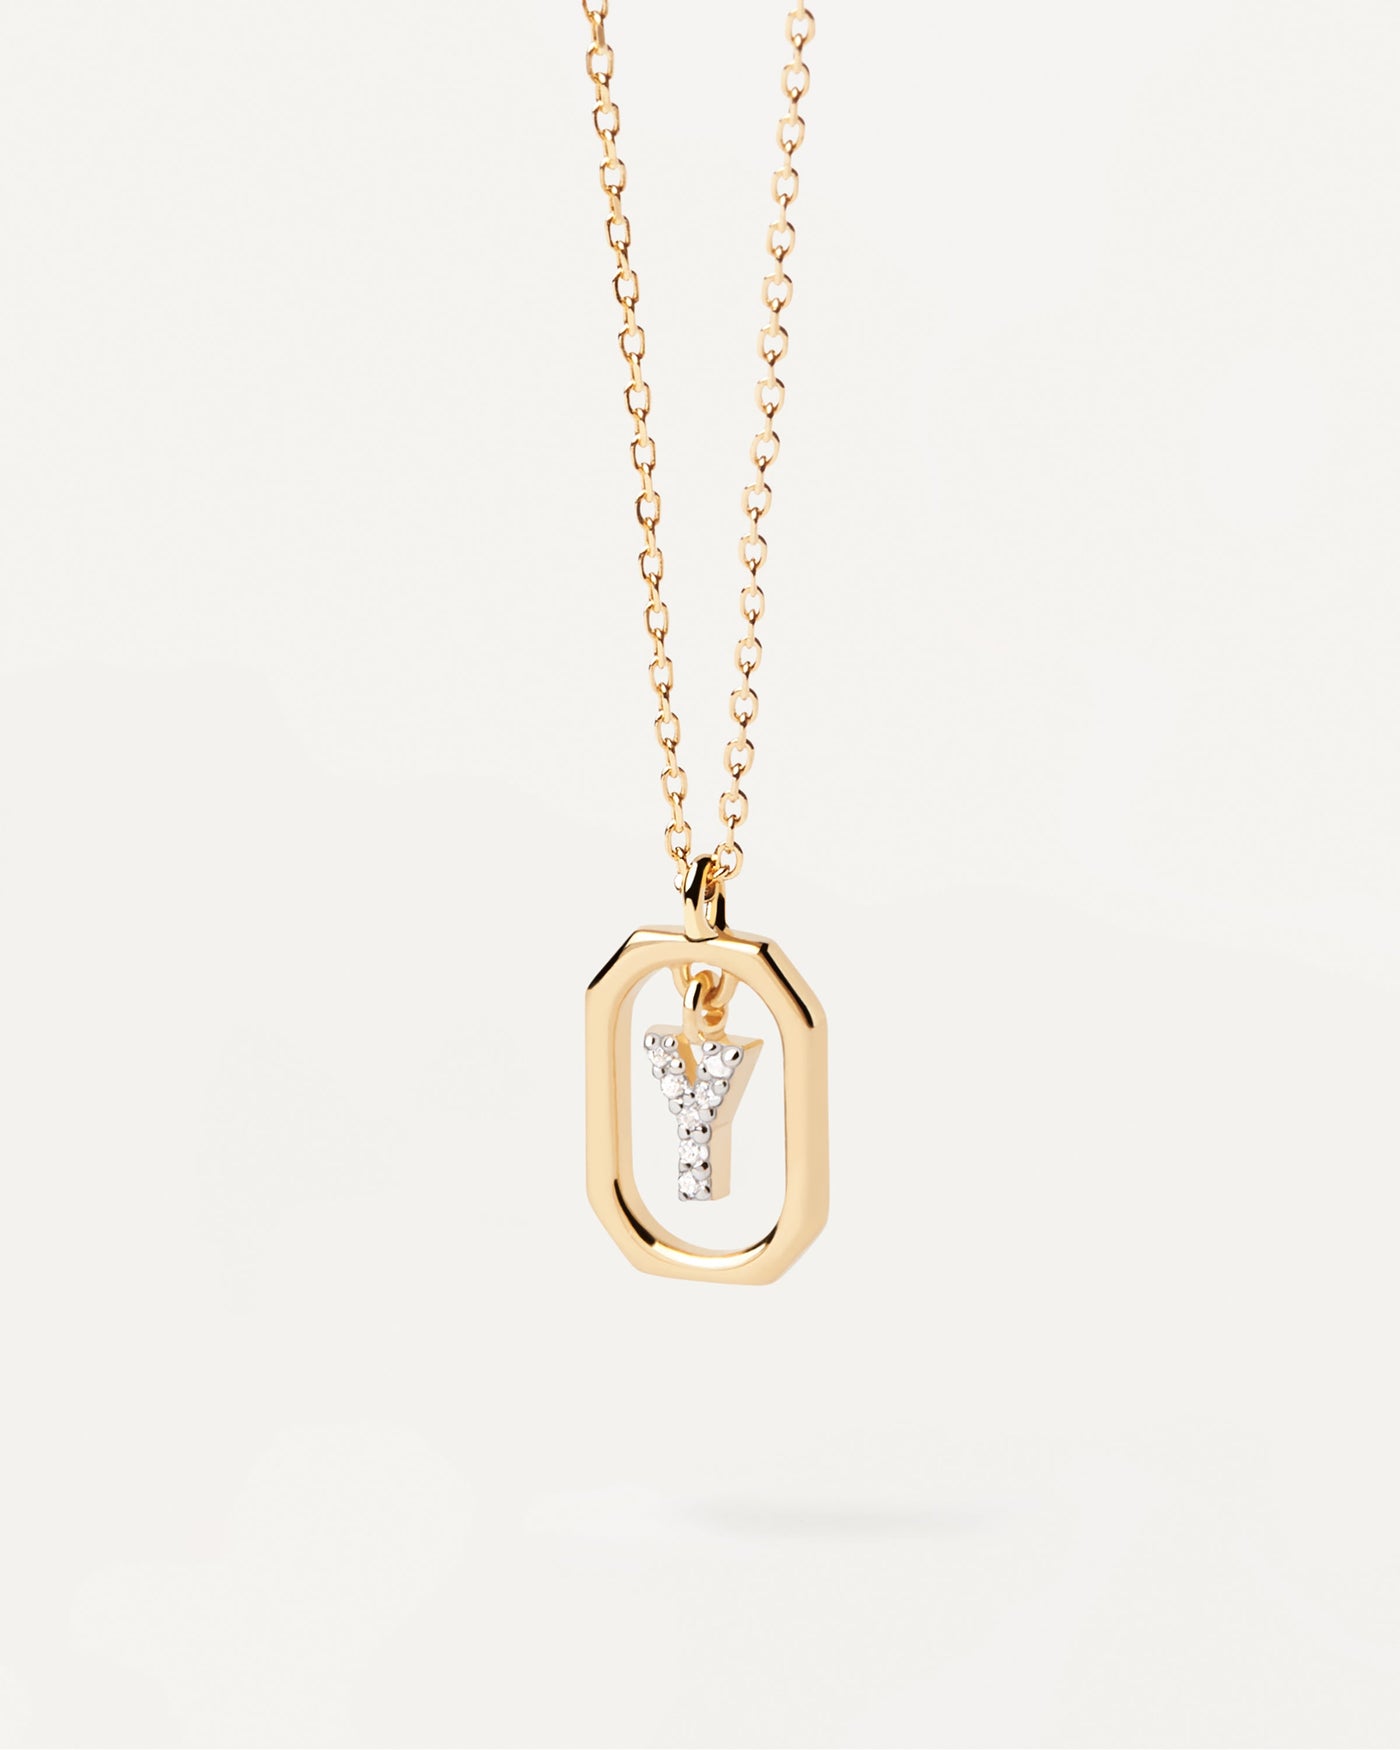 2023 Selection | Mini Letter Y Necklace. Small initial Y necklace in zirconia inside gold-plated silver octagonal pendant. Get the latest arrival from PDPAOLA. Place your order safely and get this Best Seller. Free Shipping.